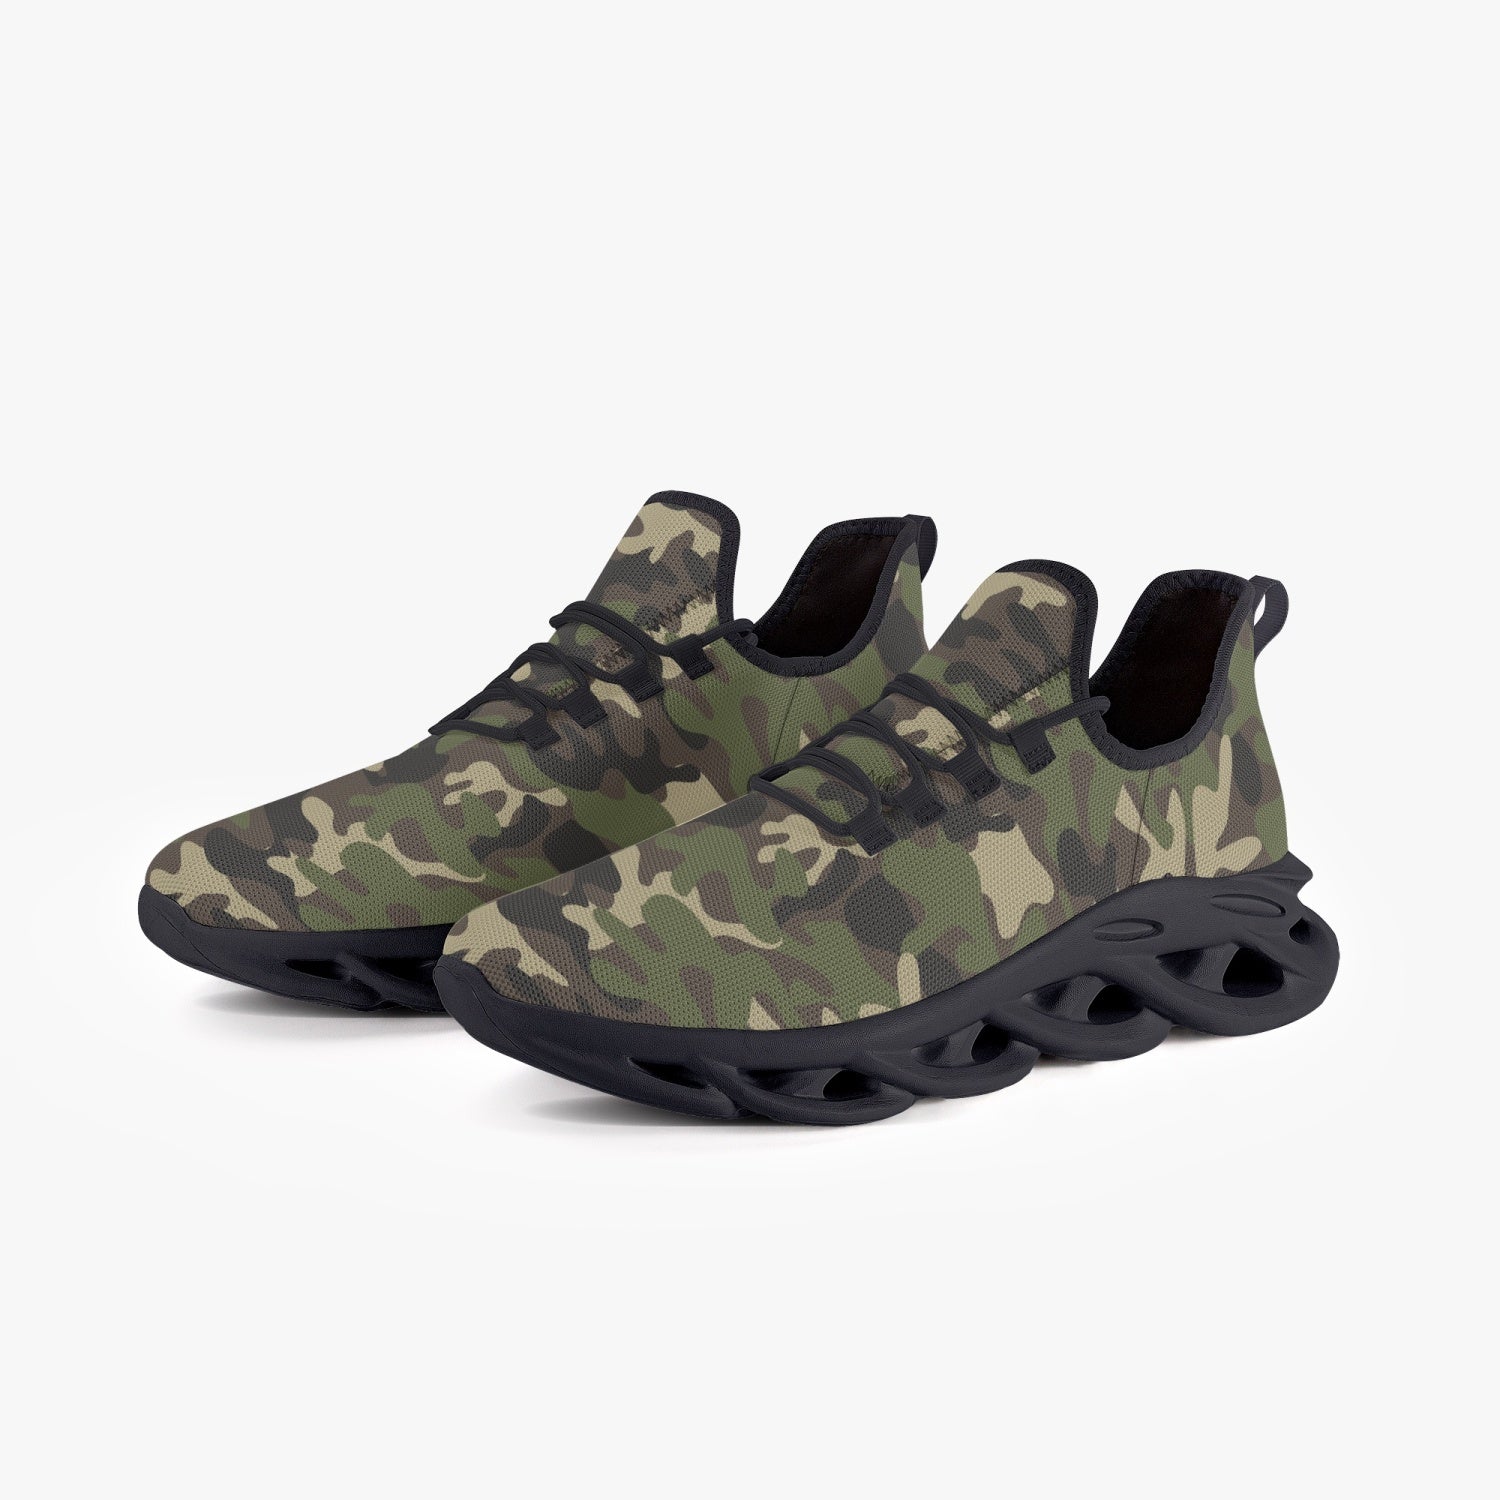 Camo Sneakers, Green Army Camouflage Bouncing Mesh Men Women Knit Running Athletic Sport Workout Breathable Lace Up Fitness Shoes Trainers Starcove Fashion